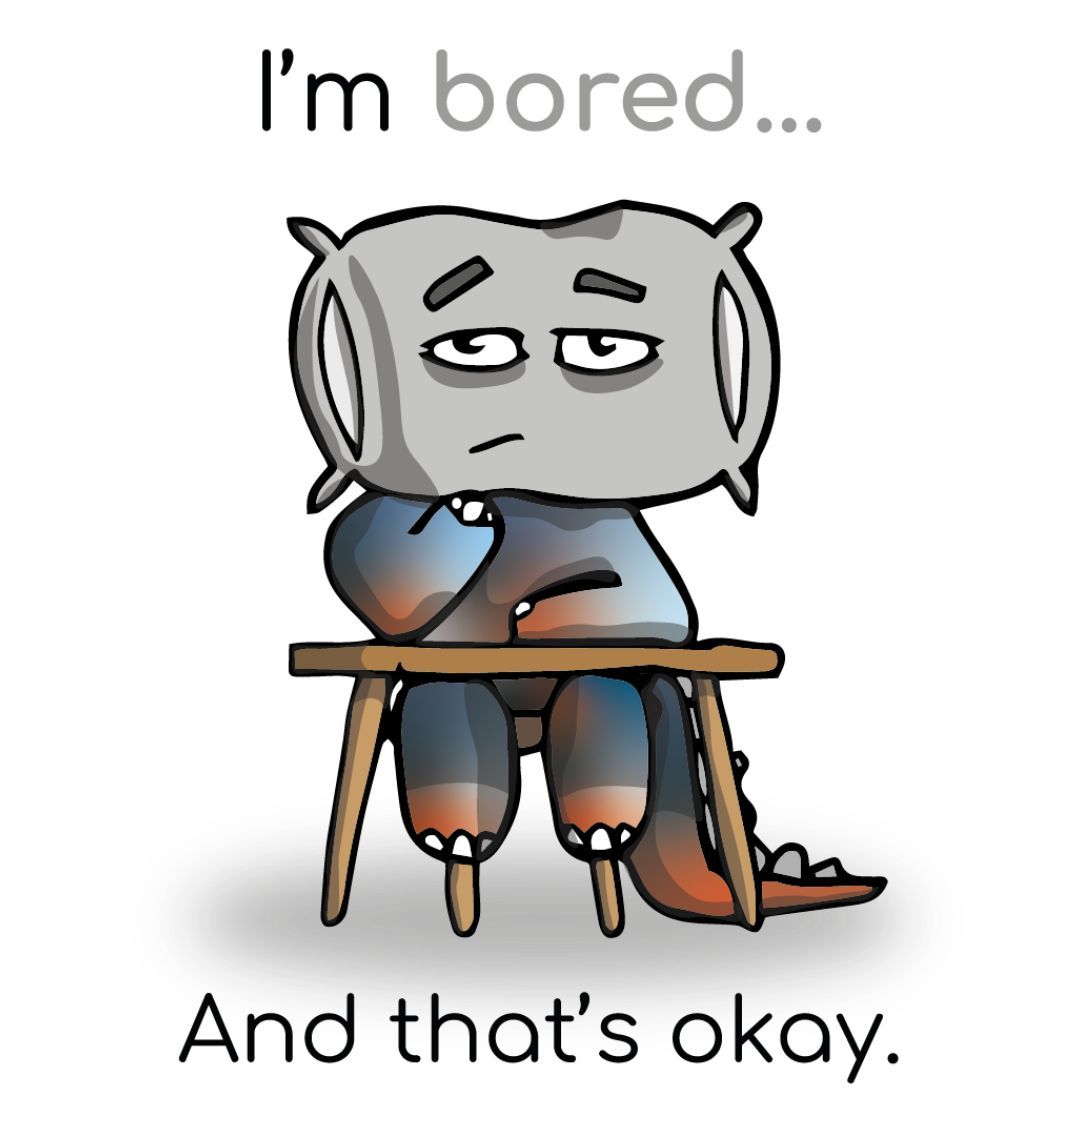 "I'm bored... And that's okay!" Mental Health Sticker